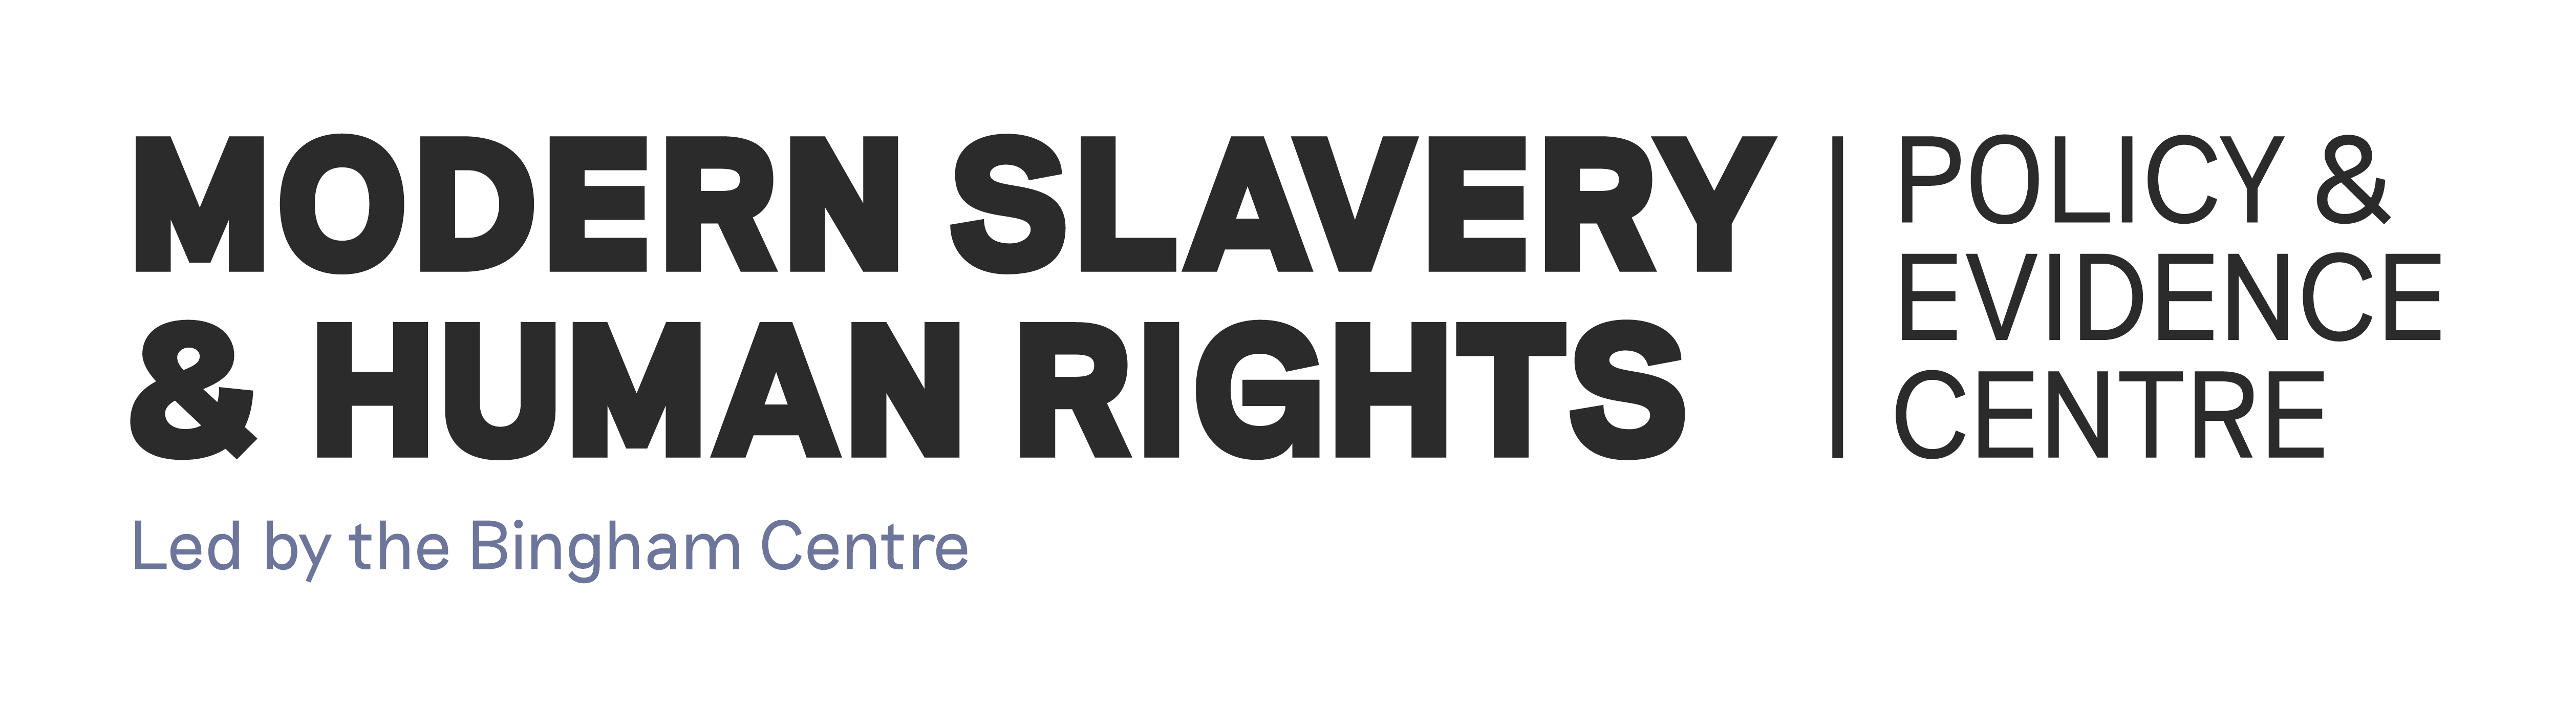 Modern Slavery and Human Rights Policy and Evidence Centre